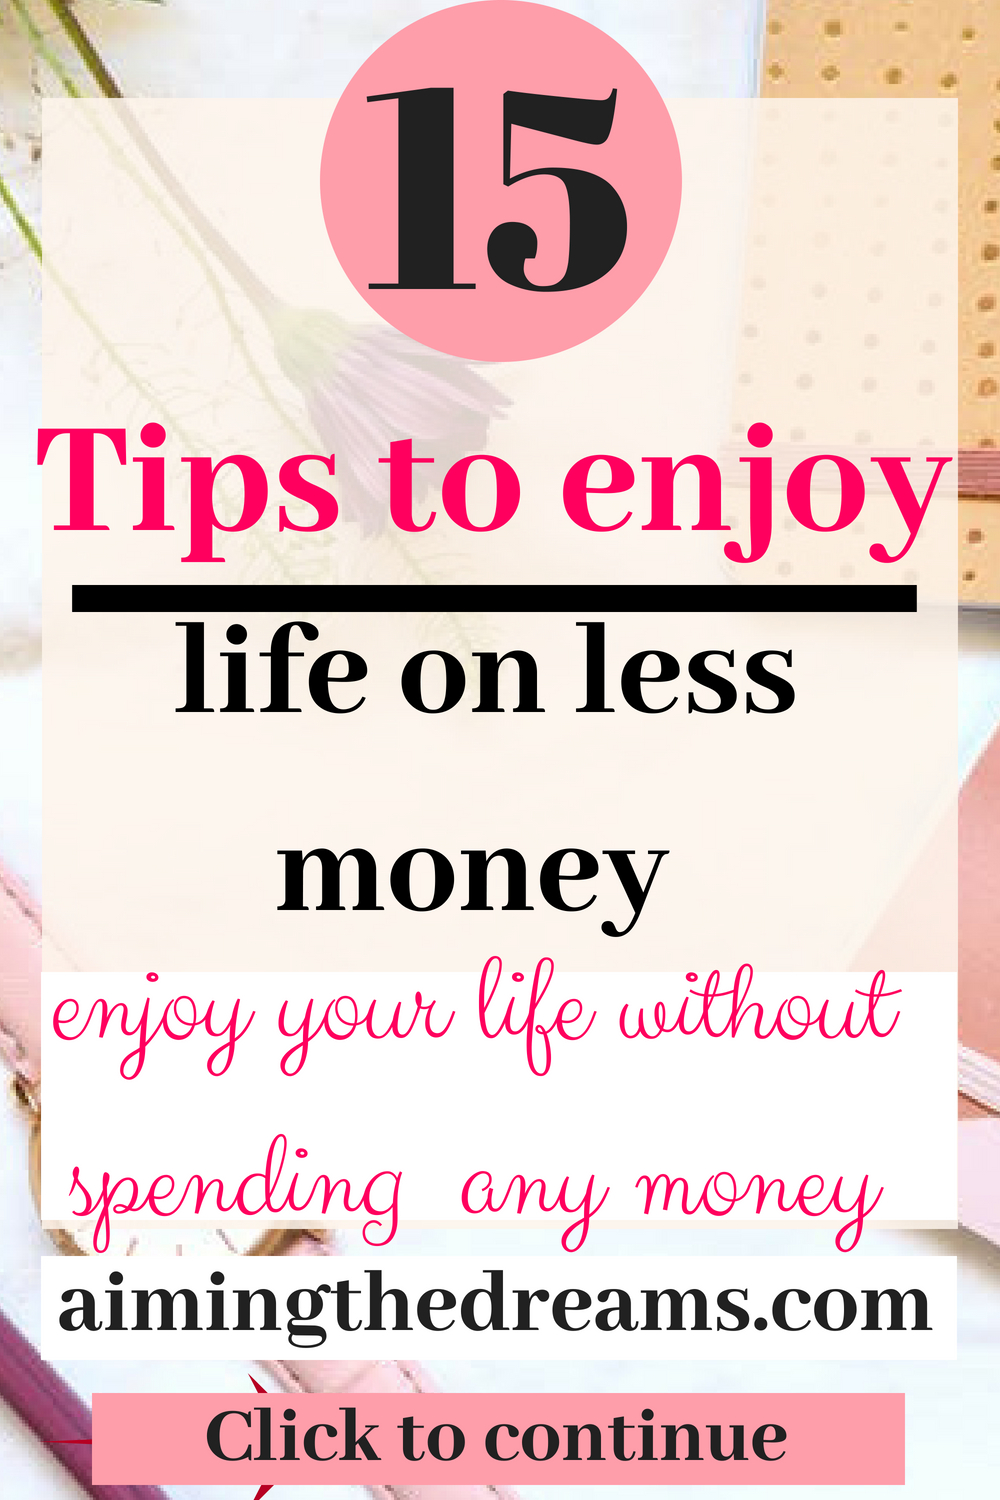 These are some activities which don't need money. You can #enjoy your #life without spending loads of #money.